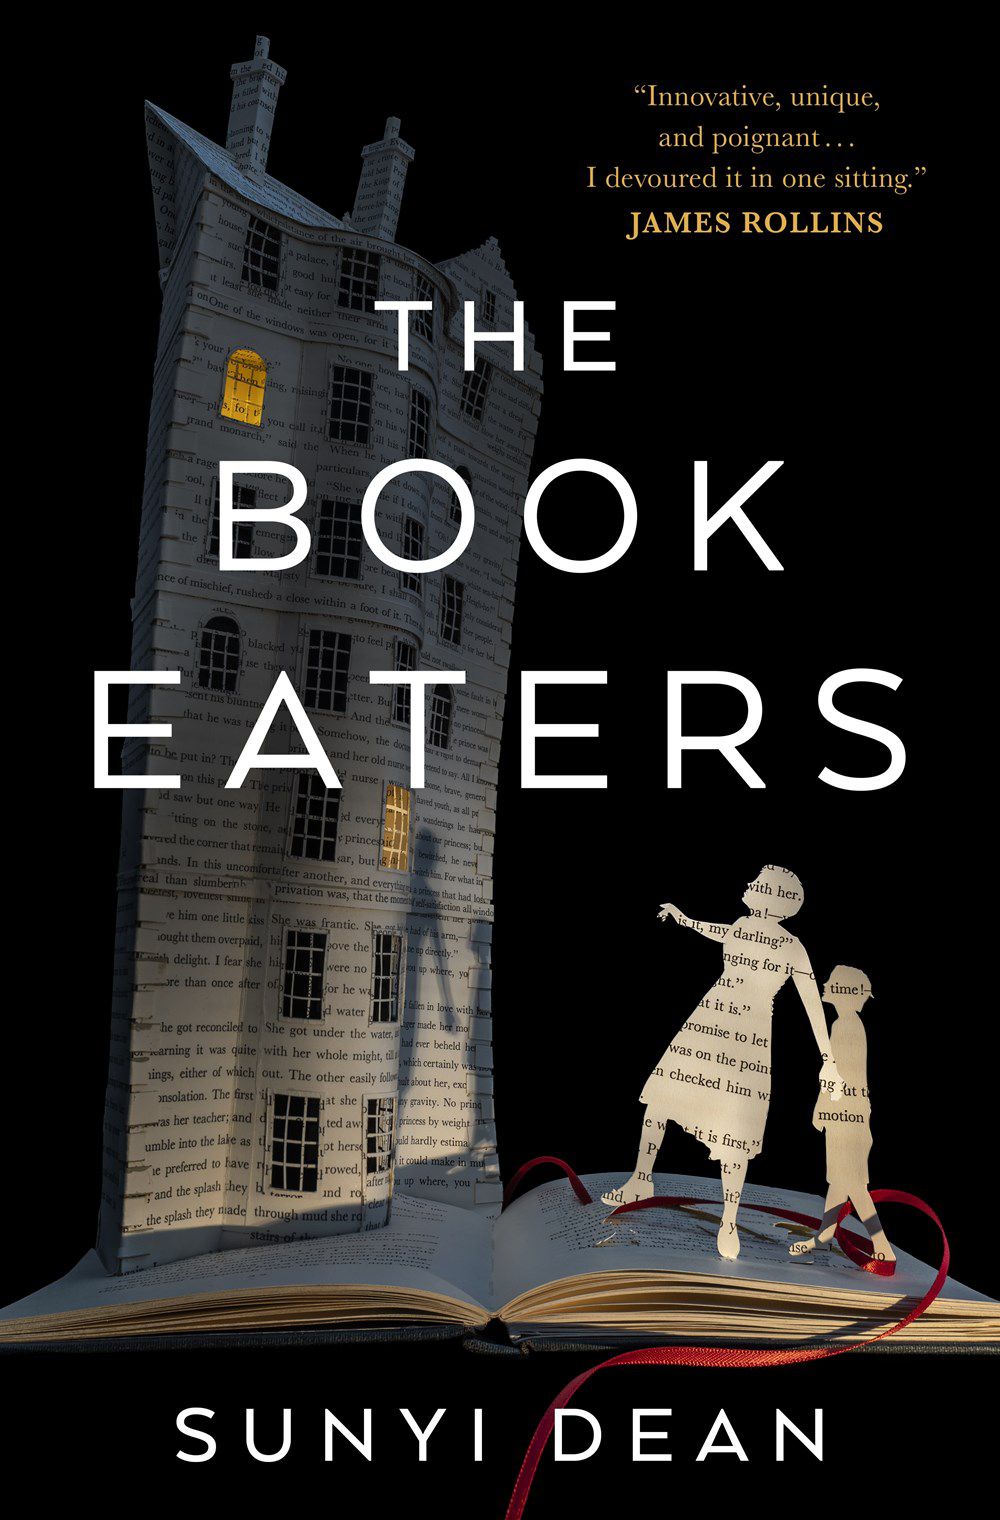 Cover art of The Book Eaters by Sunyi Dean featuring a diorama image of a parent and child and a house all made from pages of a book while standing on a book.